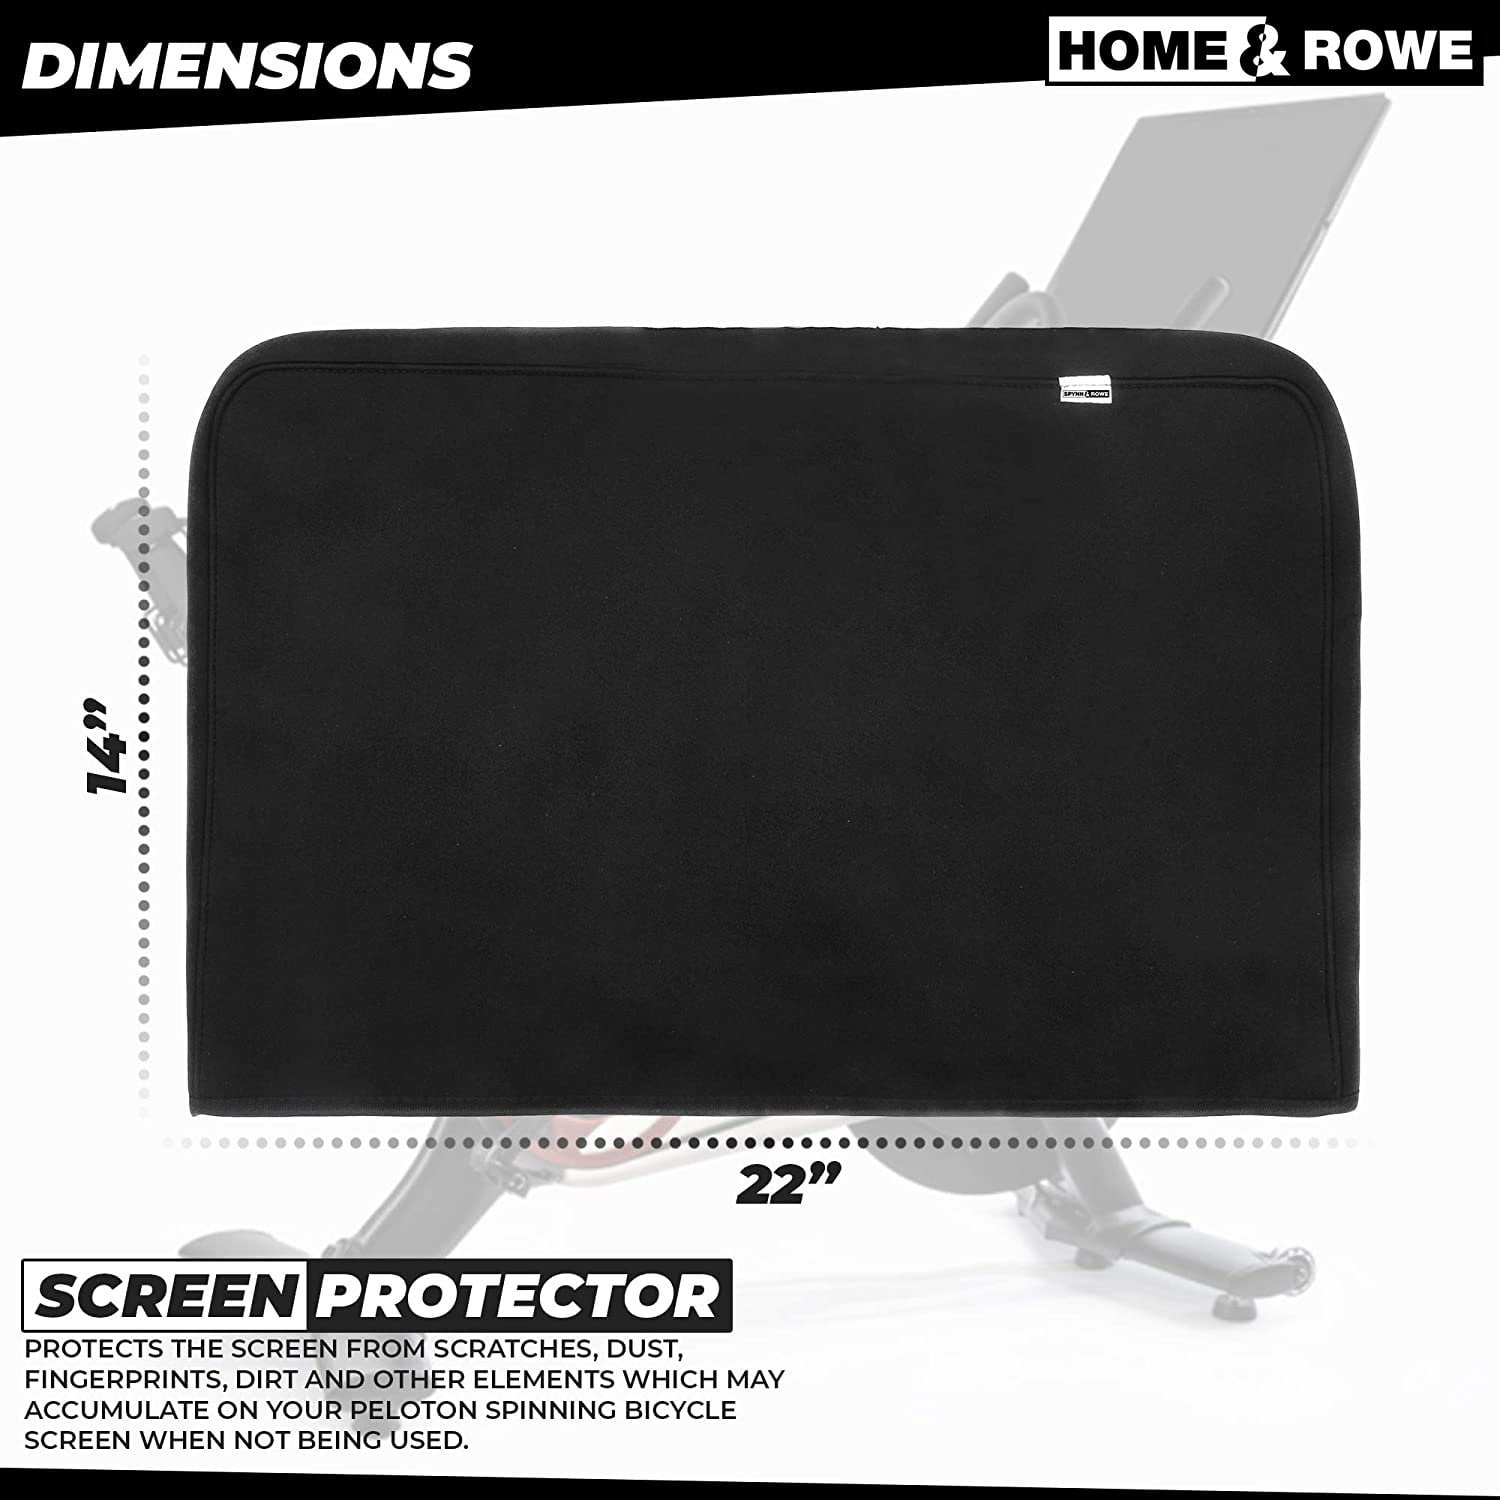 Not Peloton Bike Screen Protector Easily Fits Over the Screen of the Original Peloton Bike Neoprene Screen Cover for the Peloton Exercise Bicycle 